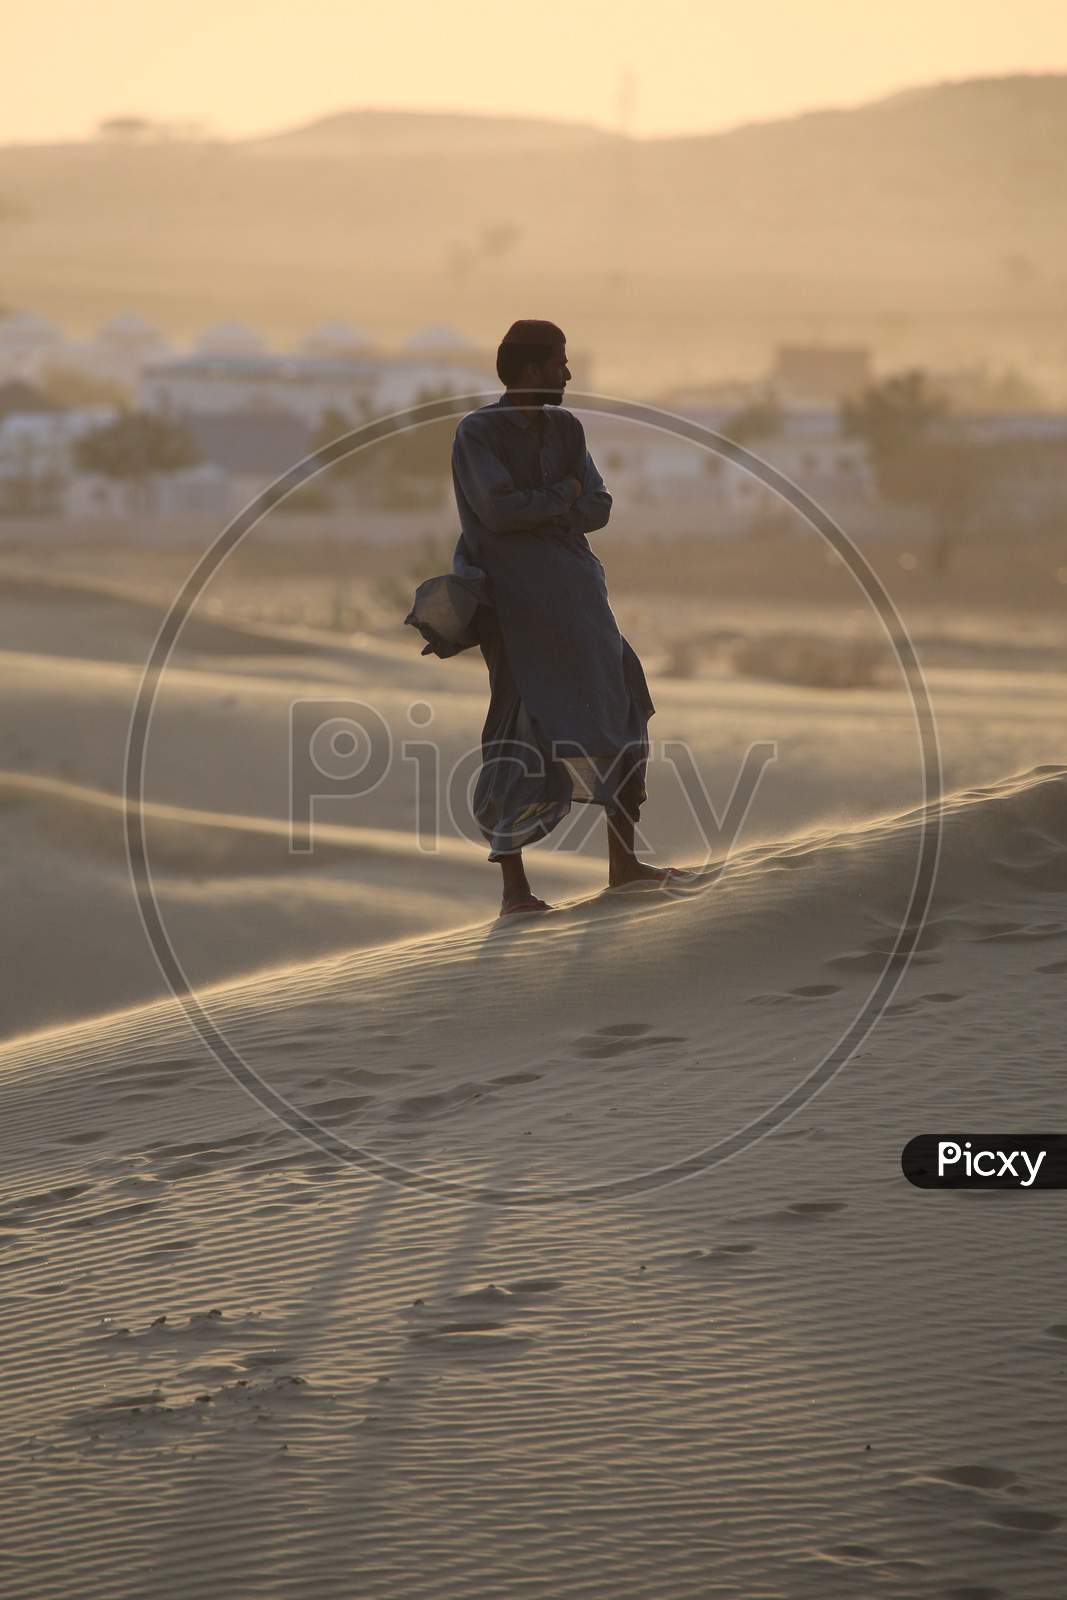 A Rajasthani man standing on the desert